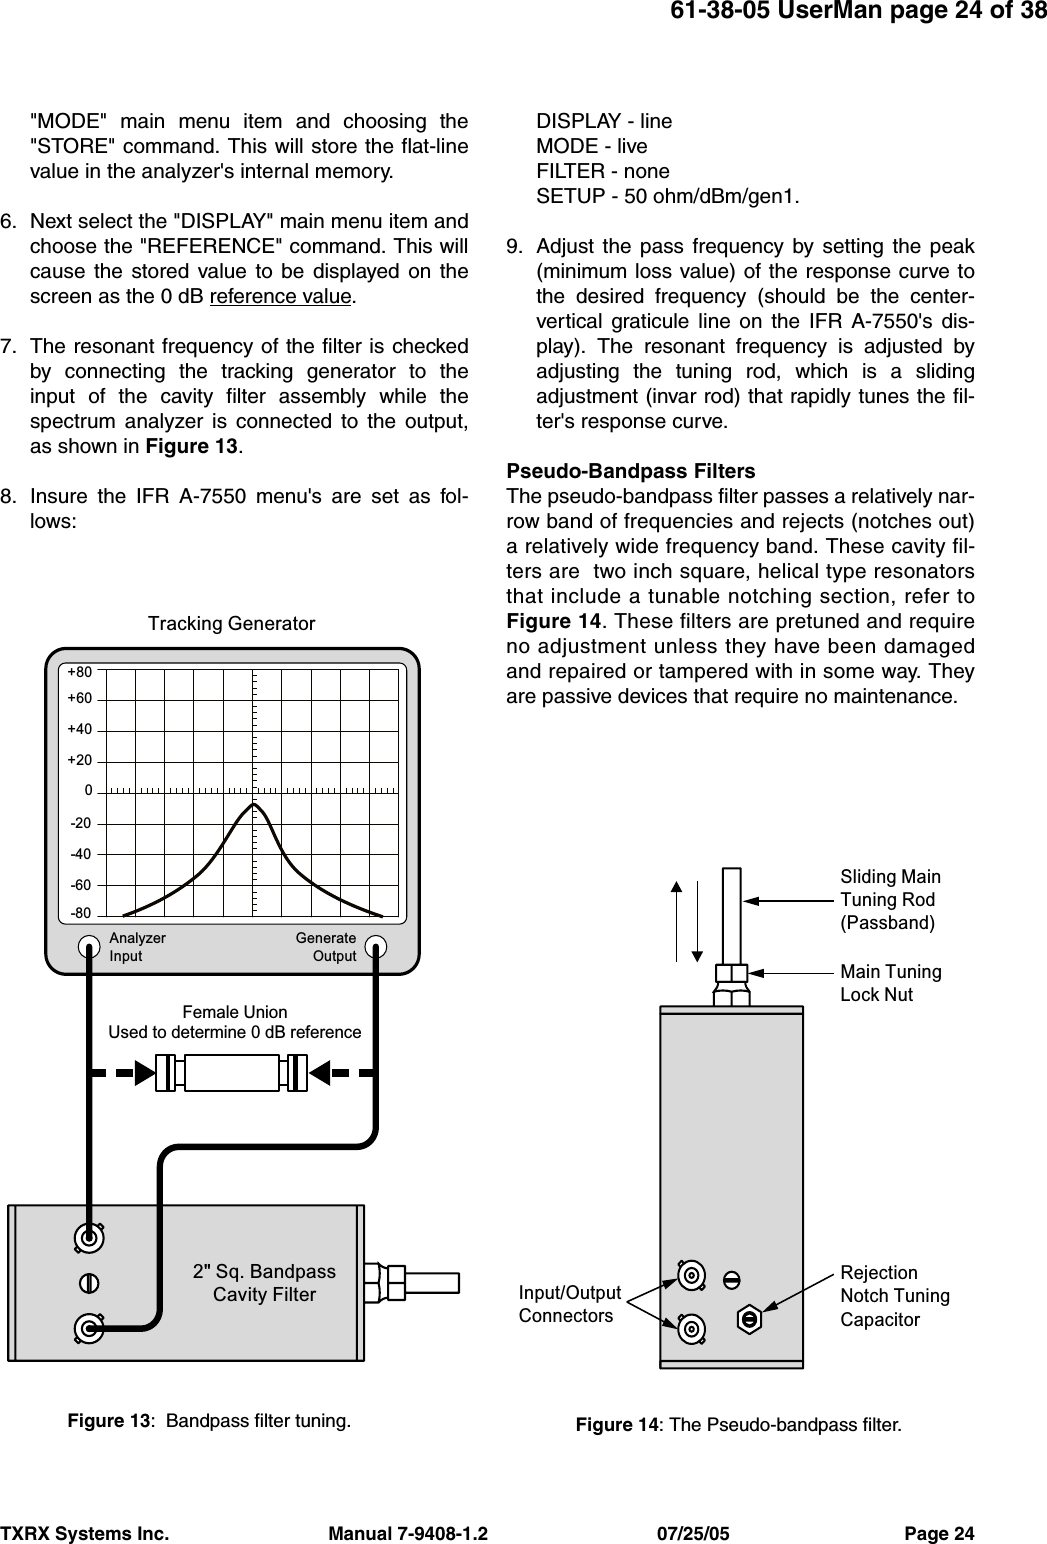 61-38-05 UserMan page 24 of 38TXRX Systems Inc.                               Manual 7-9408-1.2                                 07/25/05                                  Page 24&quot;MODE&quot; main menu item and choosing the&quot;STORE&quot; command. This will store the flat-linevalue in the analyzer&apos;s internal memory.6. Next select the &quot;DISPLAY&quot; main menu item andchoose the &quot;REFERENCE&quot; command. This willcause the stored value to be displayed on thescreen as the 0 dB reference value.7. The resonant frequency of the filter is checkedby connecting the tracking generator to theinput of the cavity filter assembly while thespectrum analyzer is connected to the output,as shown in Figure 13. 8. Insure the IFR A-7550 menu&apos;s are set as fol-lows:DISPLAY - lineMODE - liveFILTER - noneSETUP - 50 ohm/dBm/gen1.9. Adjust the pass frequency by setting the peak(minimum loss value) of the response curve tothe desired frequency (should be the center-vertical graticule line on the IFR A-7550&apos;s dis-play). The resonant frequency is adjusted byadjusting the tuning rod, which is a slidingadjustment (invar rod) that rapidly tunes the fil-ter&apos;s response curve.Pseudo-Bandpass FiltersThe pseudo-bandpass filter passes a relatively nar-row band of frequencies and rejects (notches out)a relatively wide frequency band. These cavity fil-ters are  two inch square, helical type resonatorsthat include a tunable notching section, refer toFigure 14. These filters are pretuned and requireno adjustment unless they have been damagedand repaired or tampered with in some way. Theyare passive devices that require no maintenance. Female UnionUsed to determine 0 dB referenceAnalyzerInputGenerateOutput+60+80+40+200-20-40-60-80Tracking Generator2&quot; Sq. BandpassCavity FilterFigure 13:  Bandpass filter tuning.Sliding MainTuning Rod(Passband)Main TuningLock NutRejectionNotch TuningCapacitorInput/OutputConnectorsFigure 14: The Pseudo-bandpass filter.